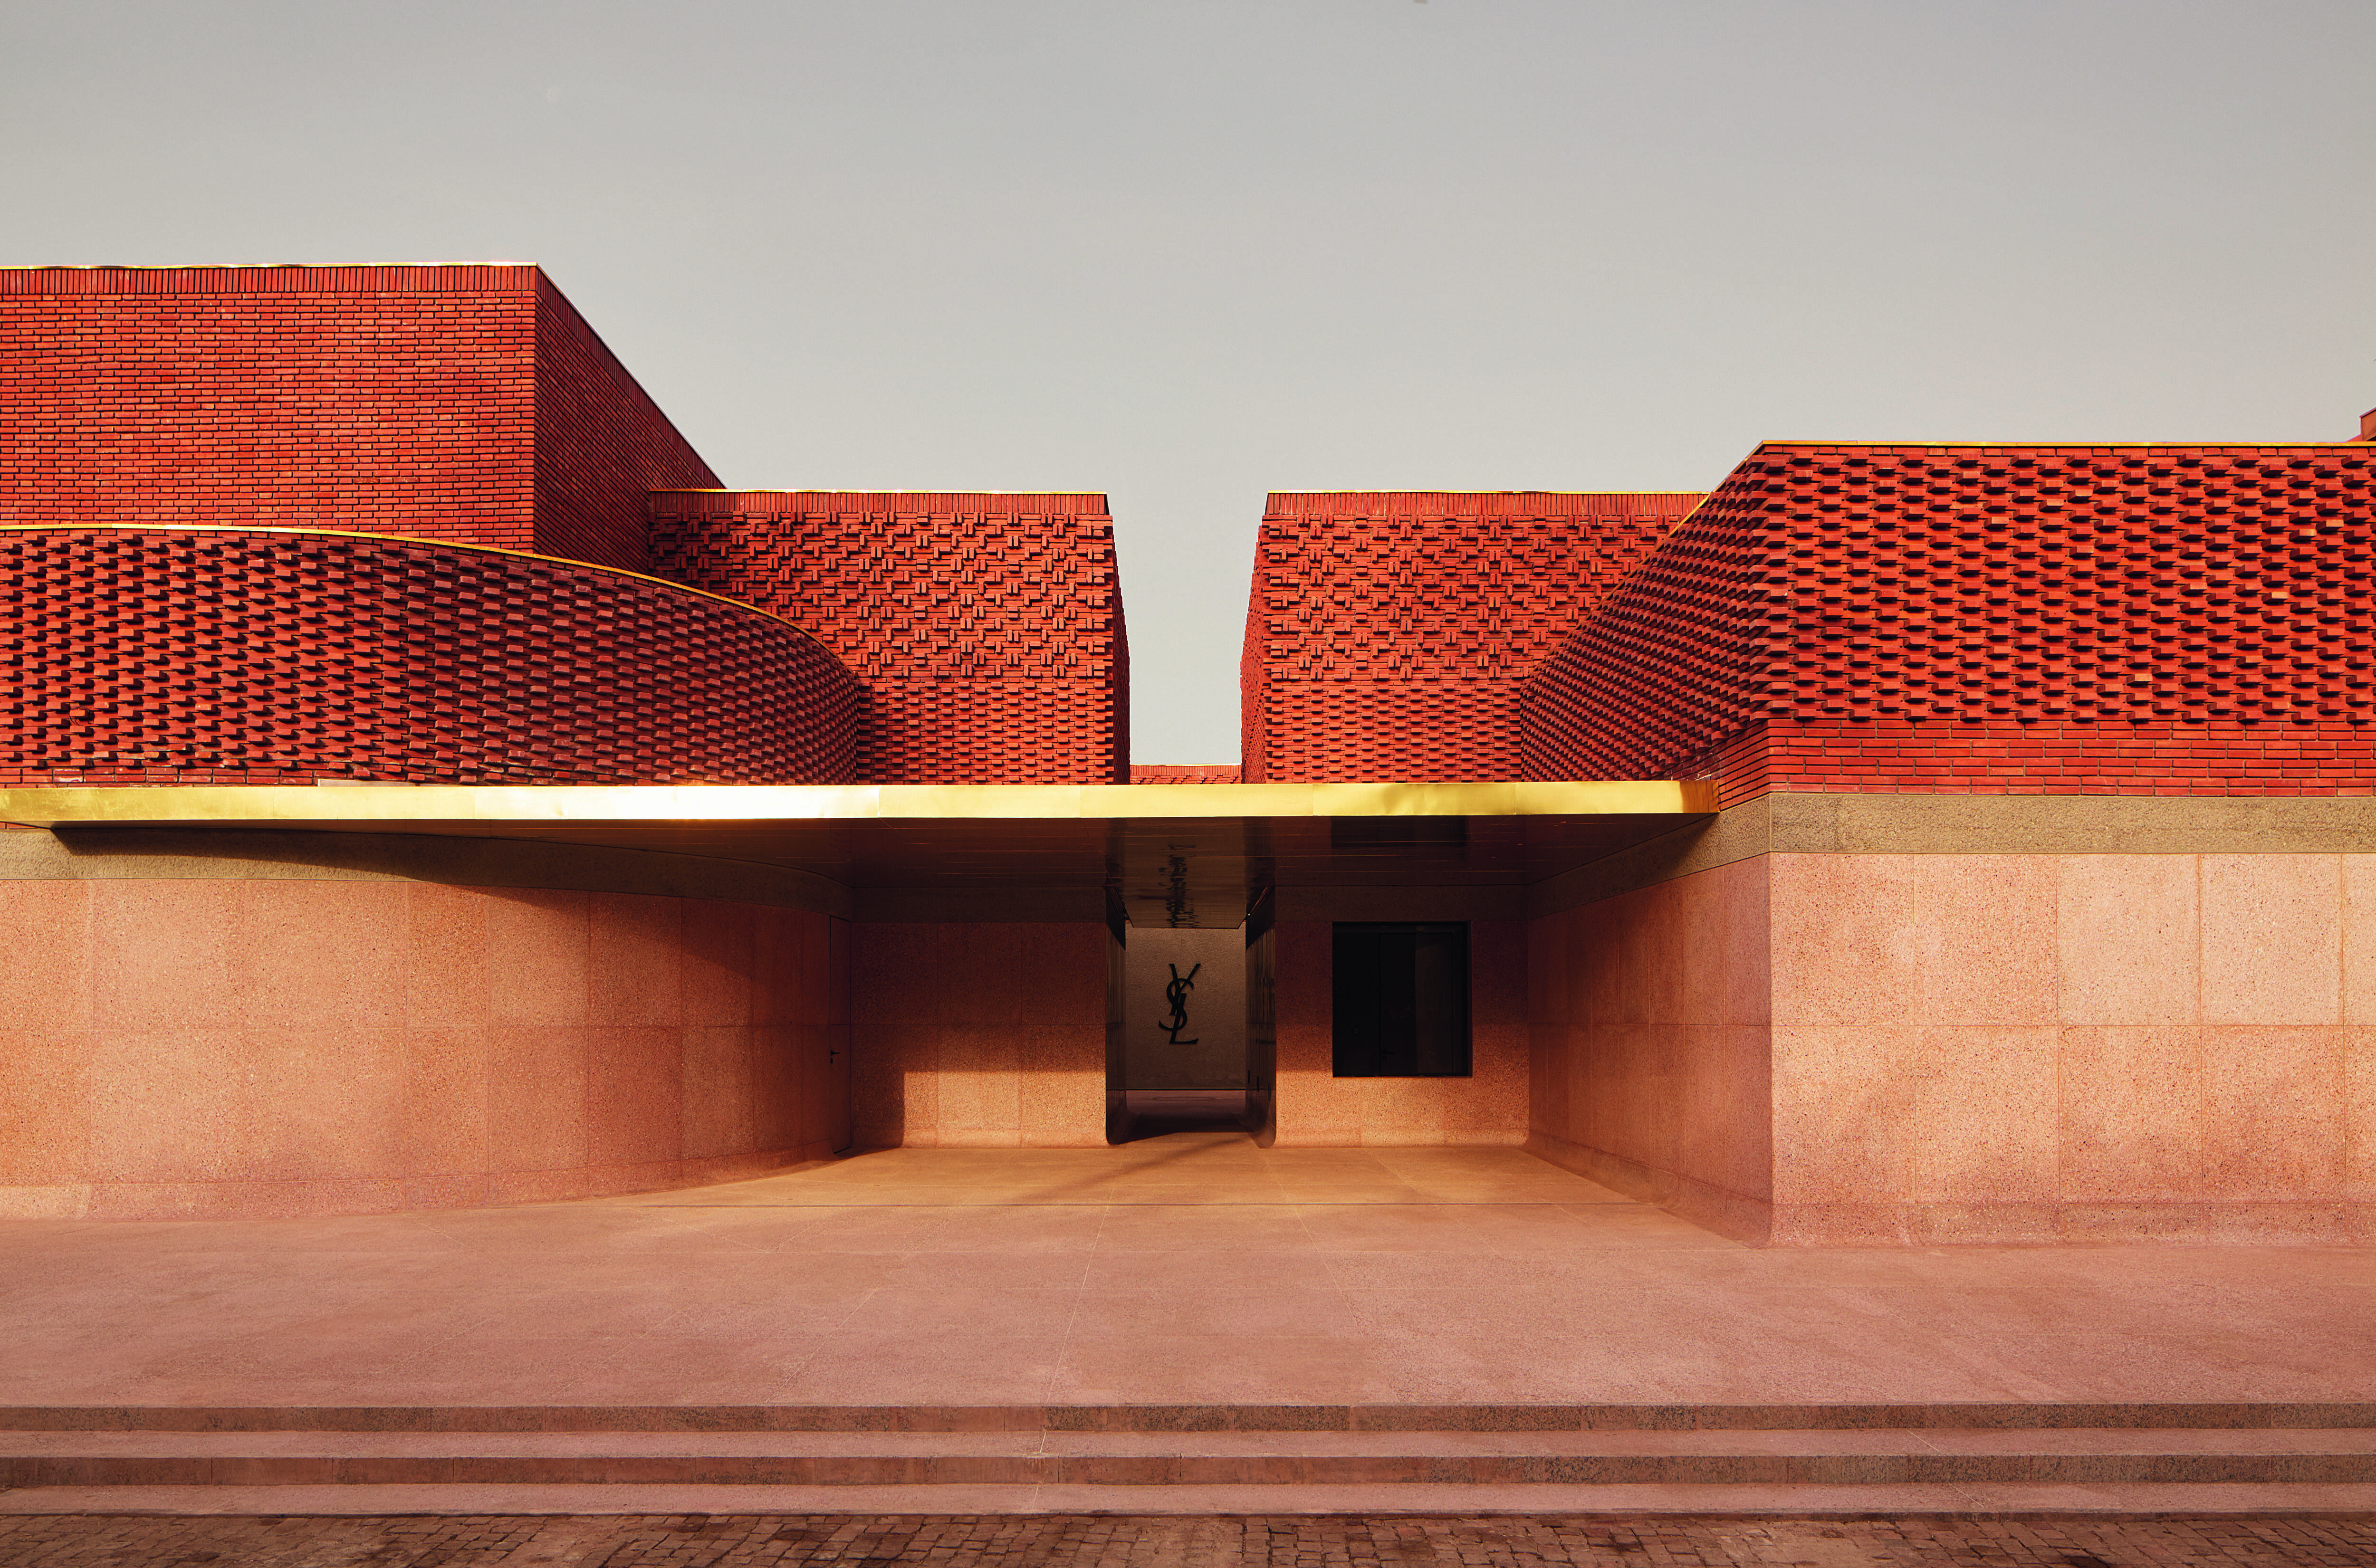 All you need to know about Yves Saint Laurent Museum Marrakech